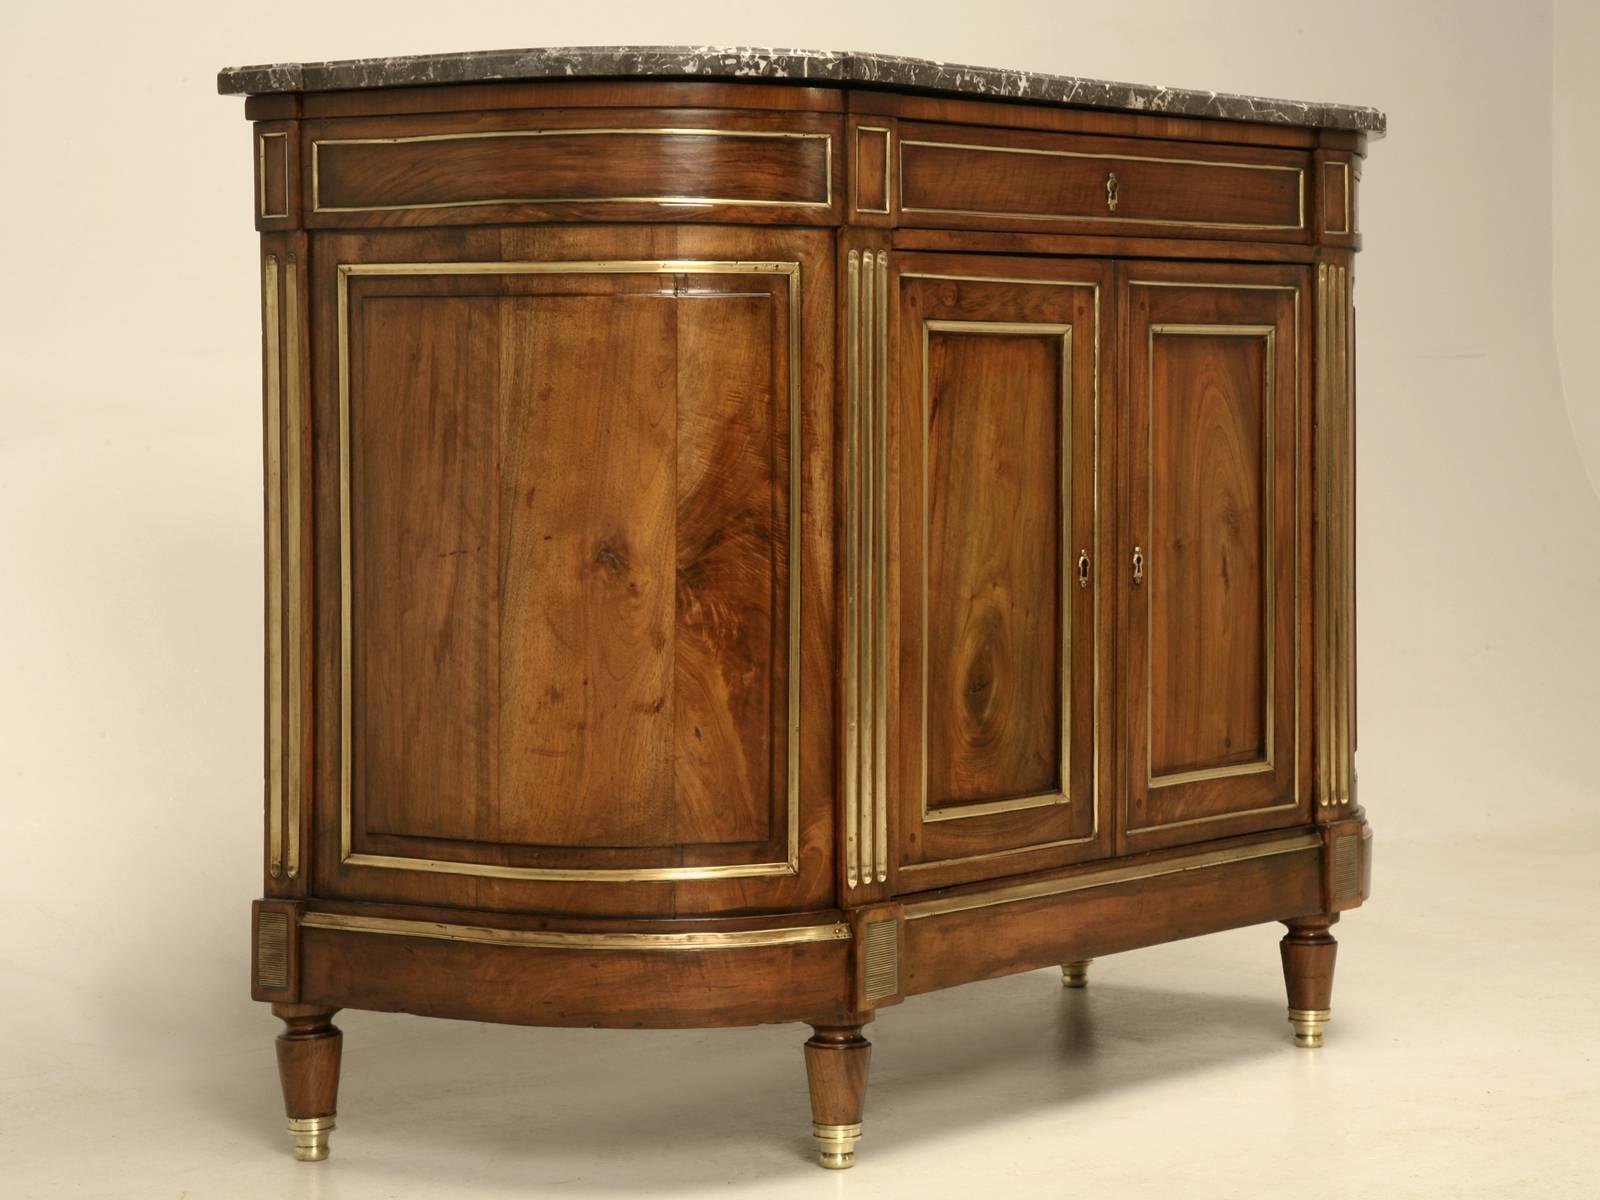 Typically, when we find similar Louis XVI buffets they are almost always mahogany and I cannot remember the last one that wasn’t, until now. This is an incredible French walnut buffet with the most amazing grain patterns, so we took the long way to